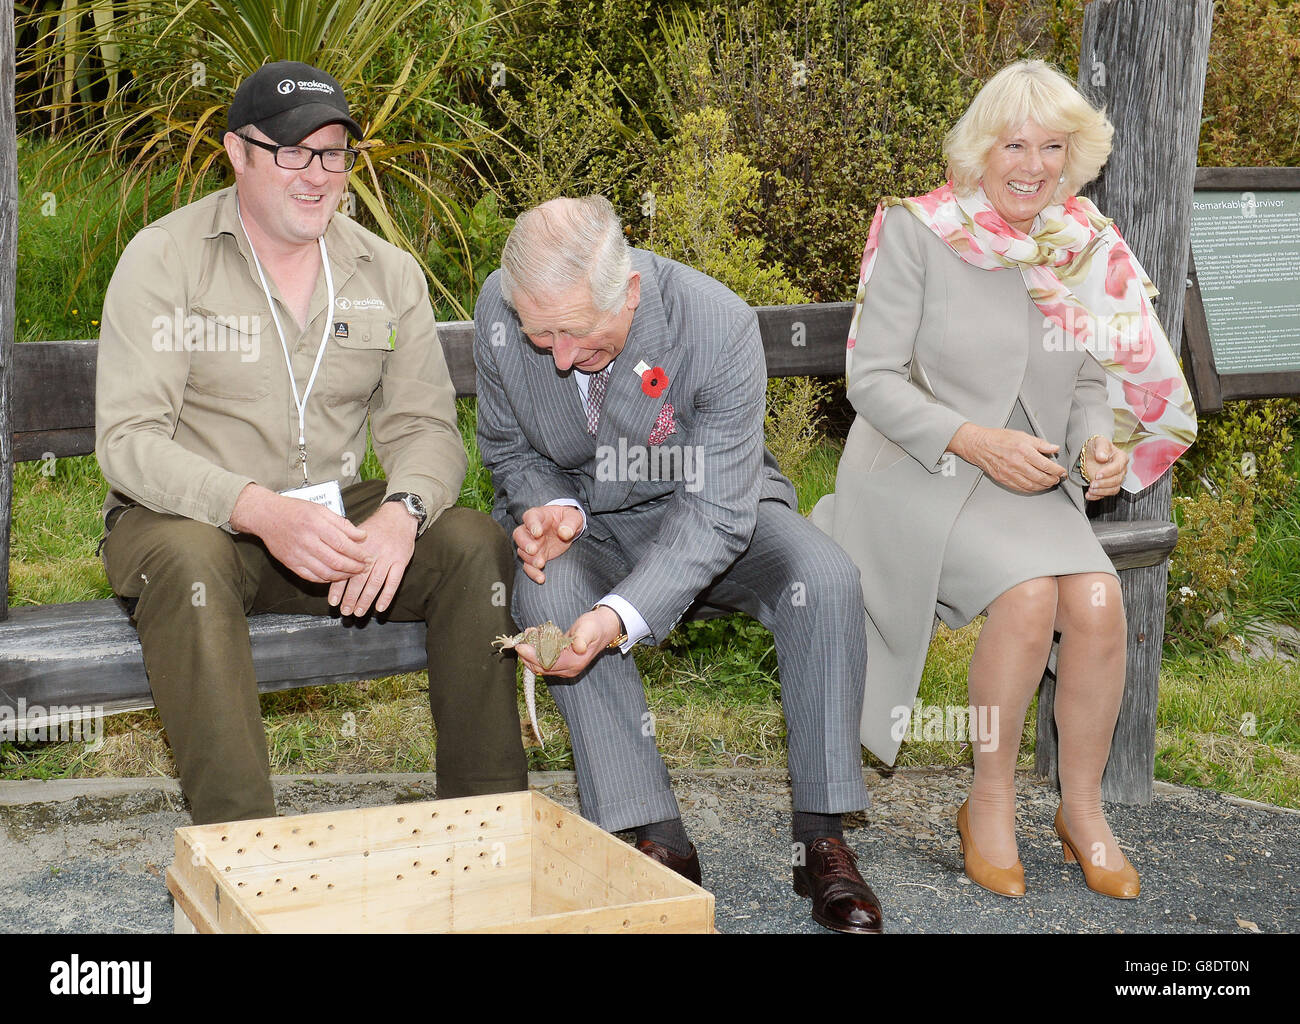 The Prince of Wales holds a reptile as the Duchess of Cornwall giggles with delight, after a large bee landed between his legs and disappeared up inside his jacket, during a visit to the Orokonui ecosanctuary outside the city of Dunedin on the south island of New Zealand. l Stock Photo